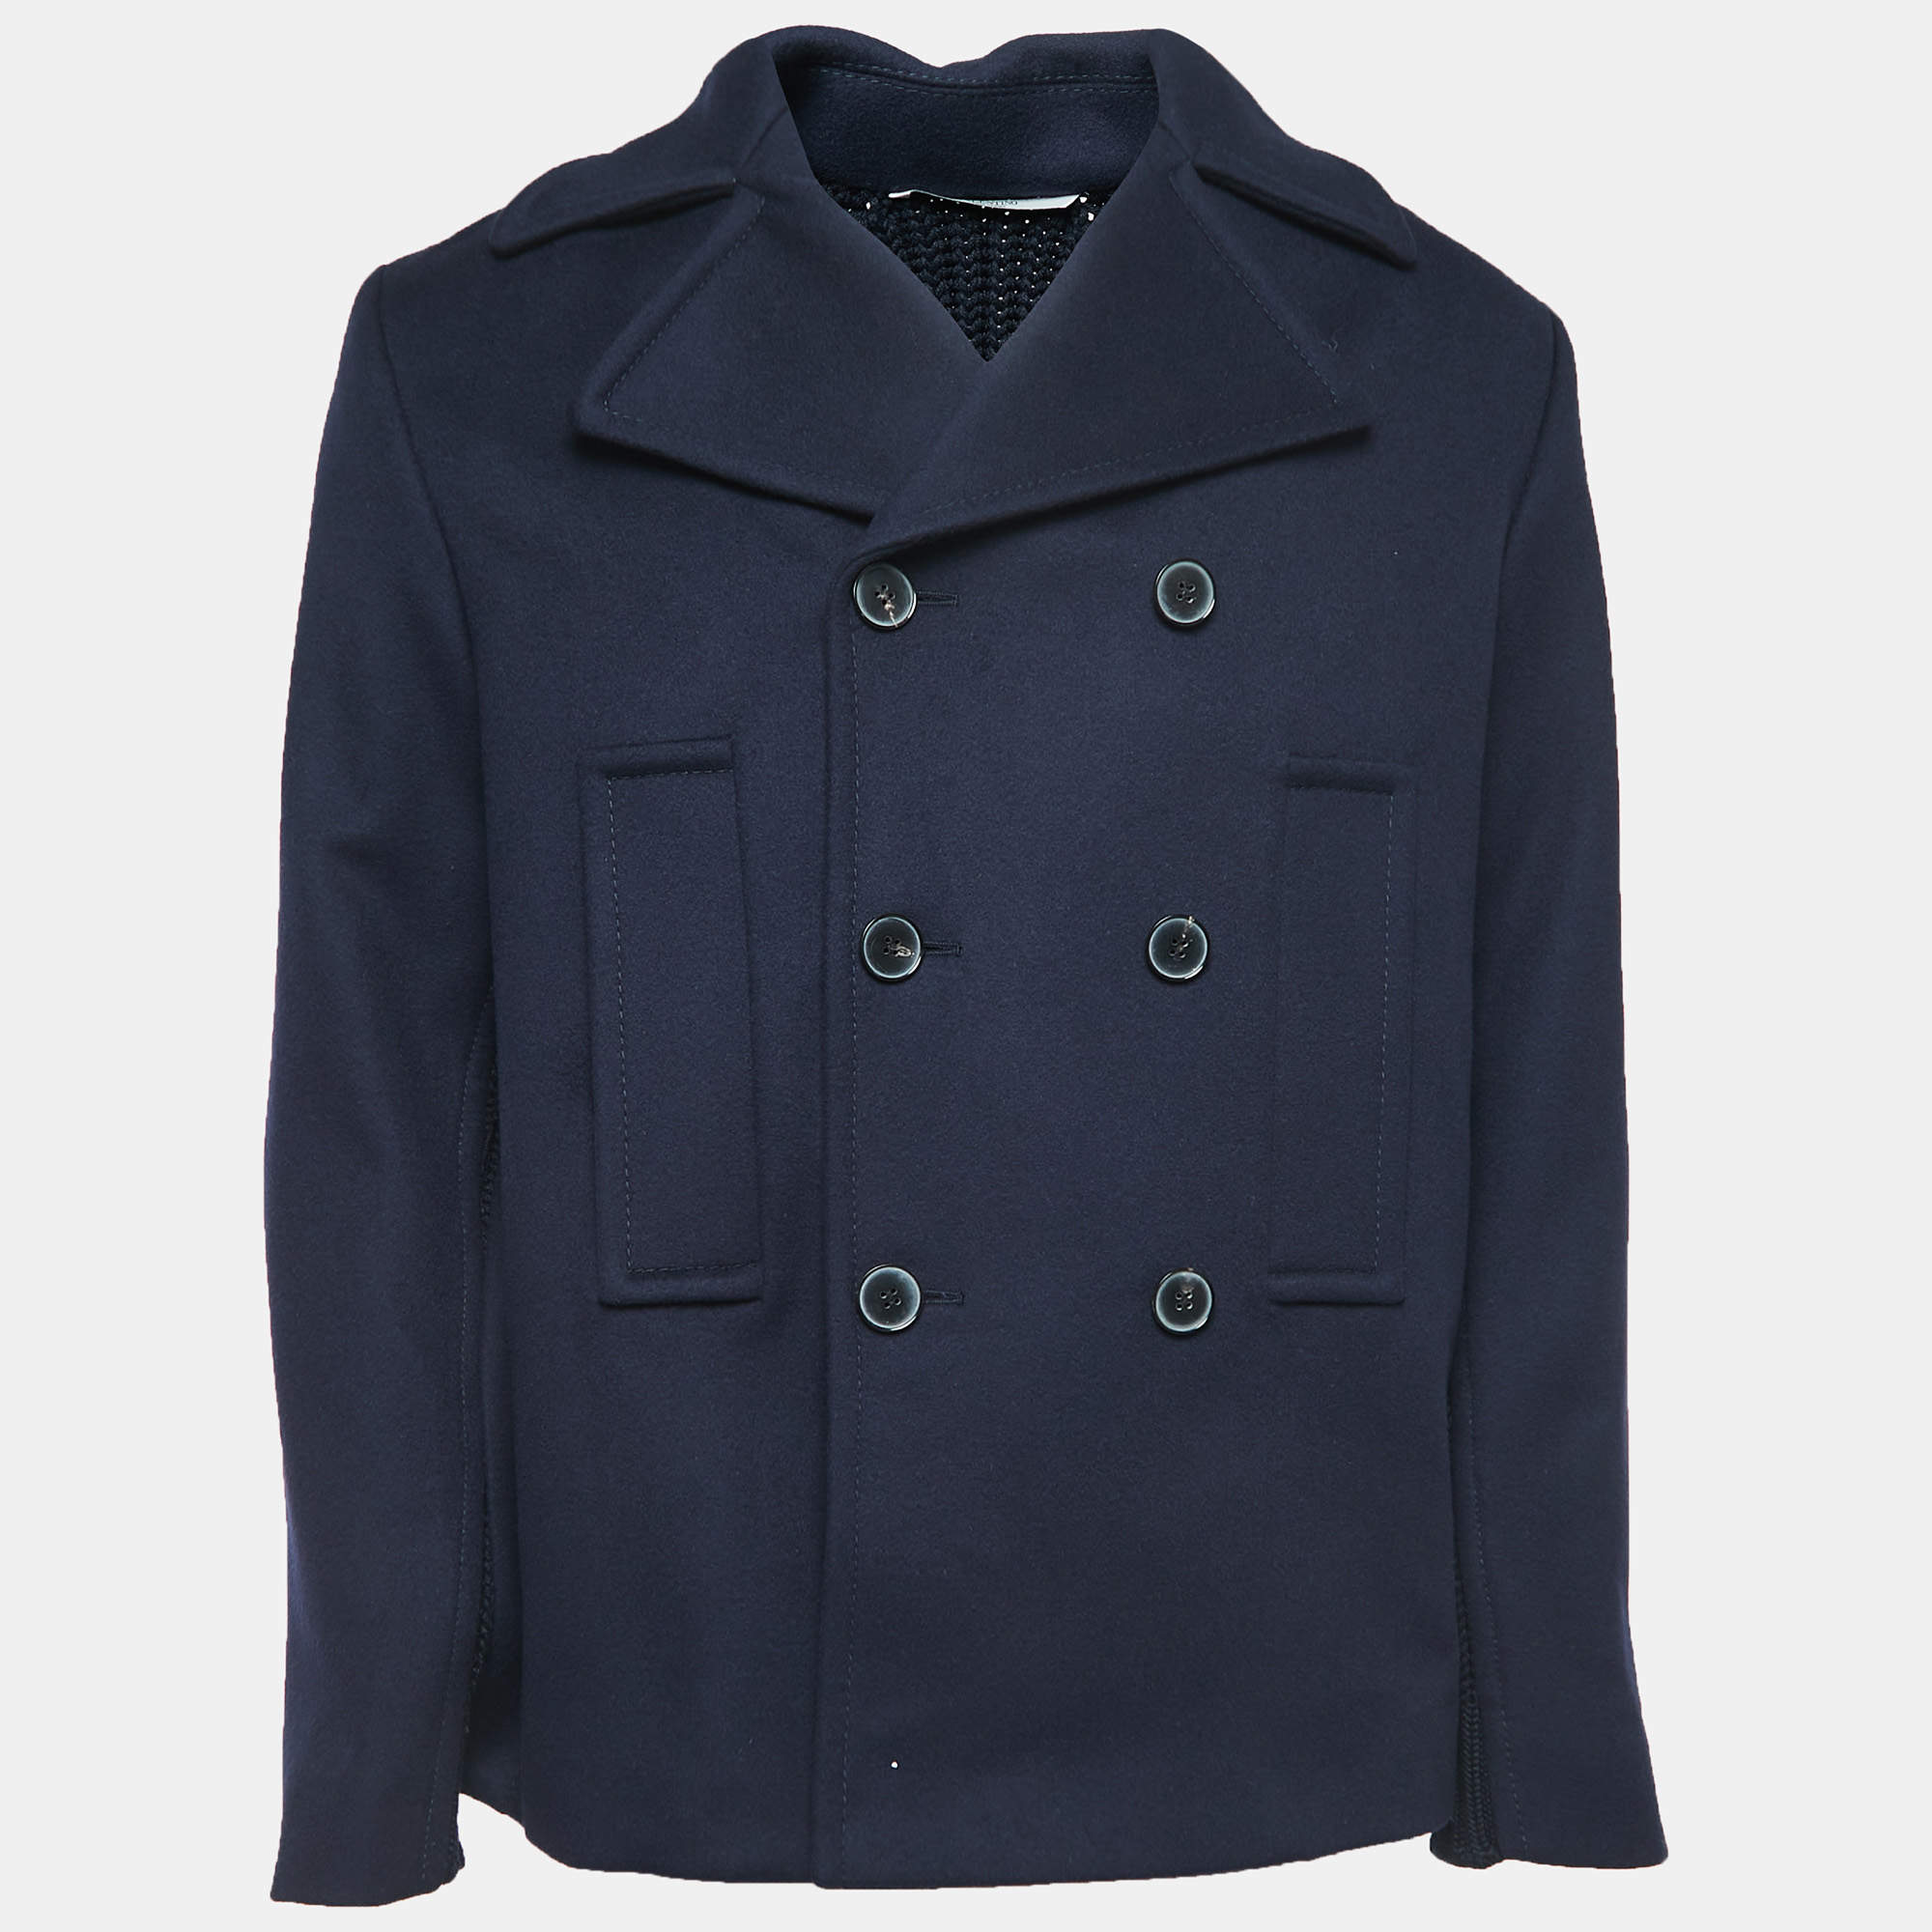 Prada Double-Breasted Cashmere Coat, Men, Navy, Size 46r